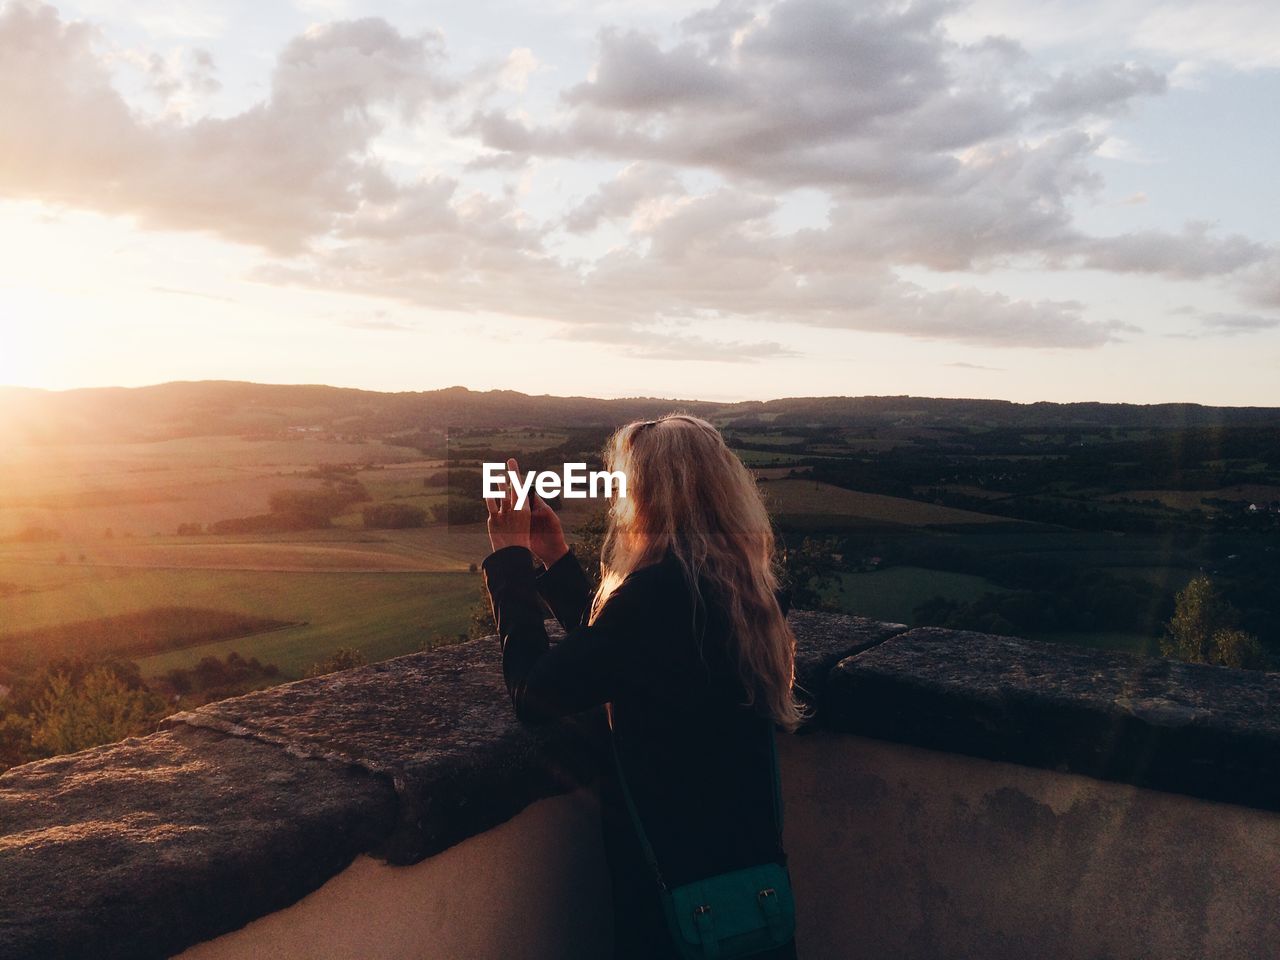 Woman photographing landscape through mobile phone during sunset